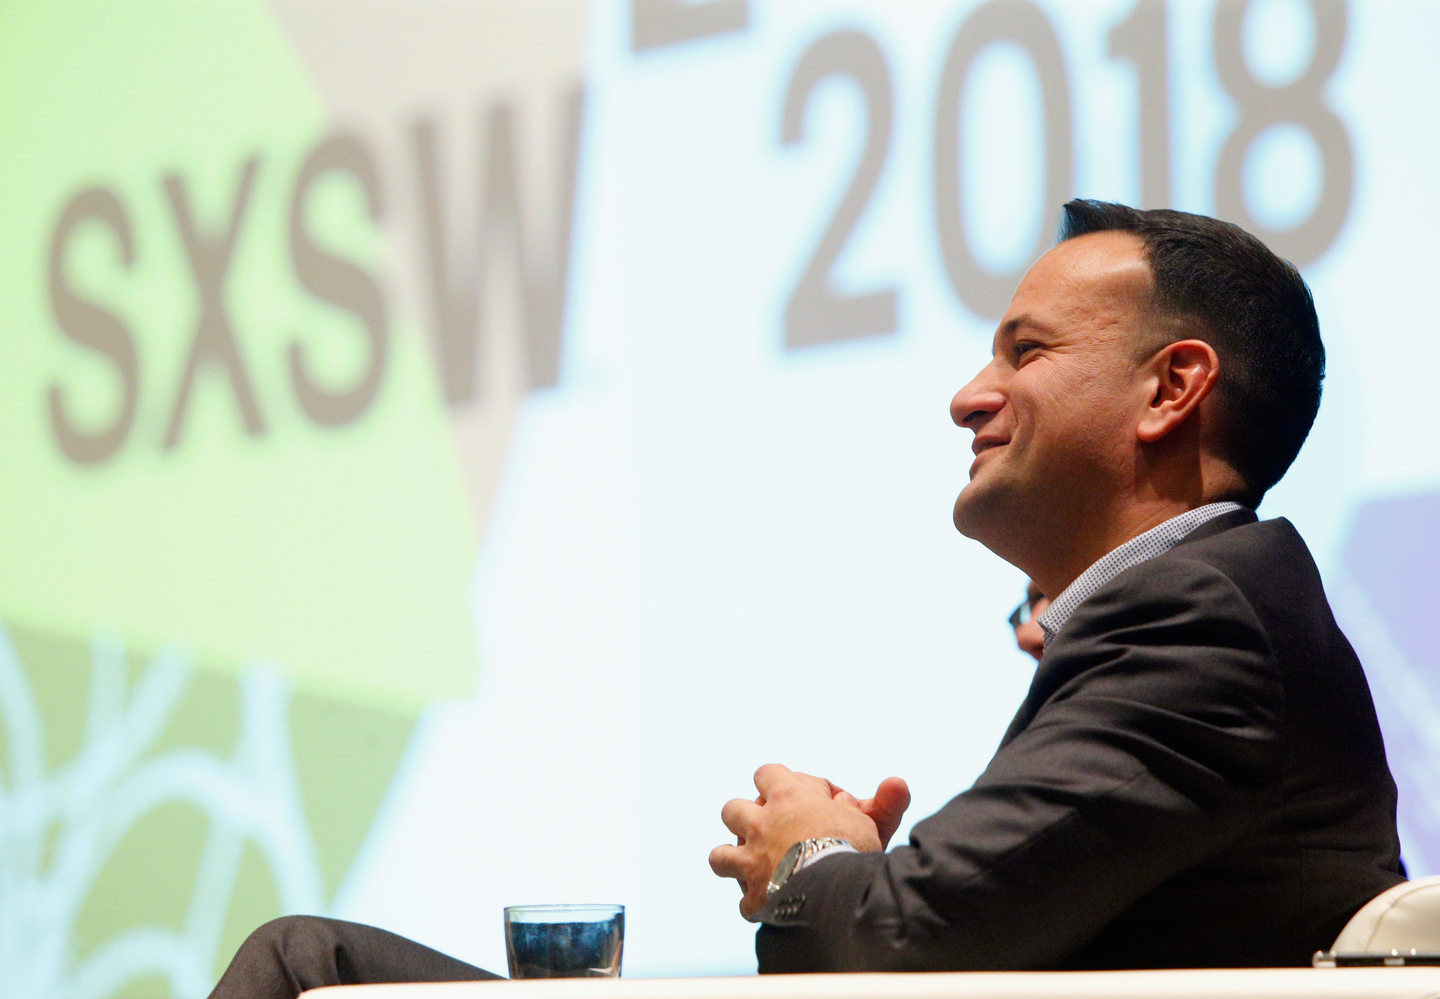 SXSW 2018 presented the T.D. Prime Minister of Ireland with “A Conversation with Leo Varadkar.” Photo by Steve Rogers Photography/Getty Images for SXSW